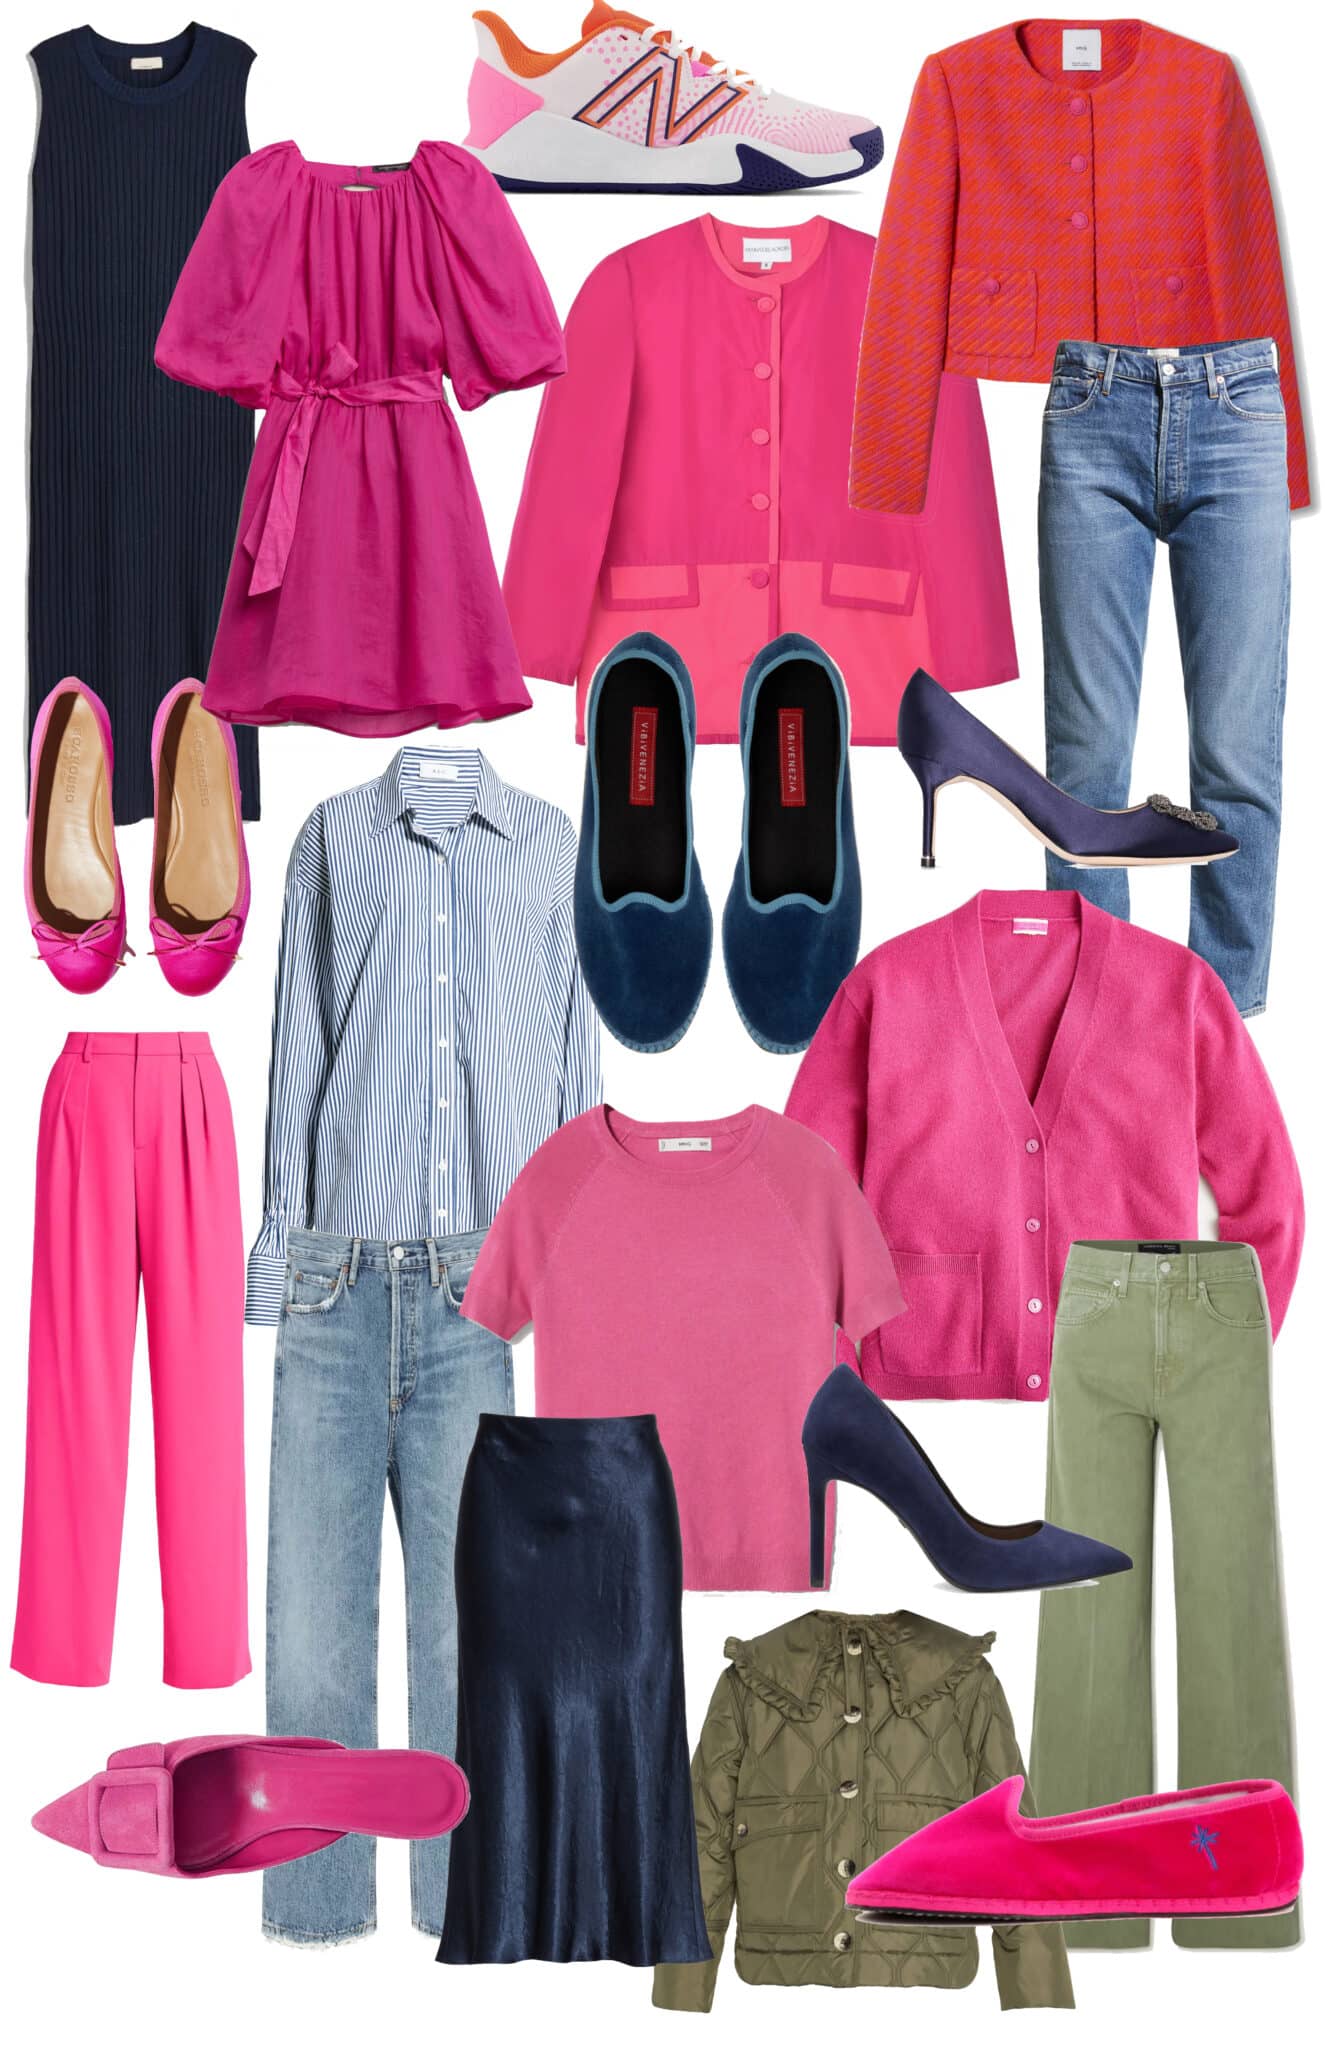 HOT PINK FASHION FINDS BARBIECORE